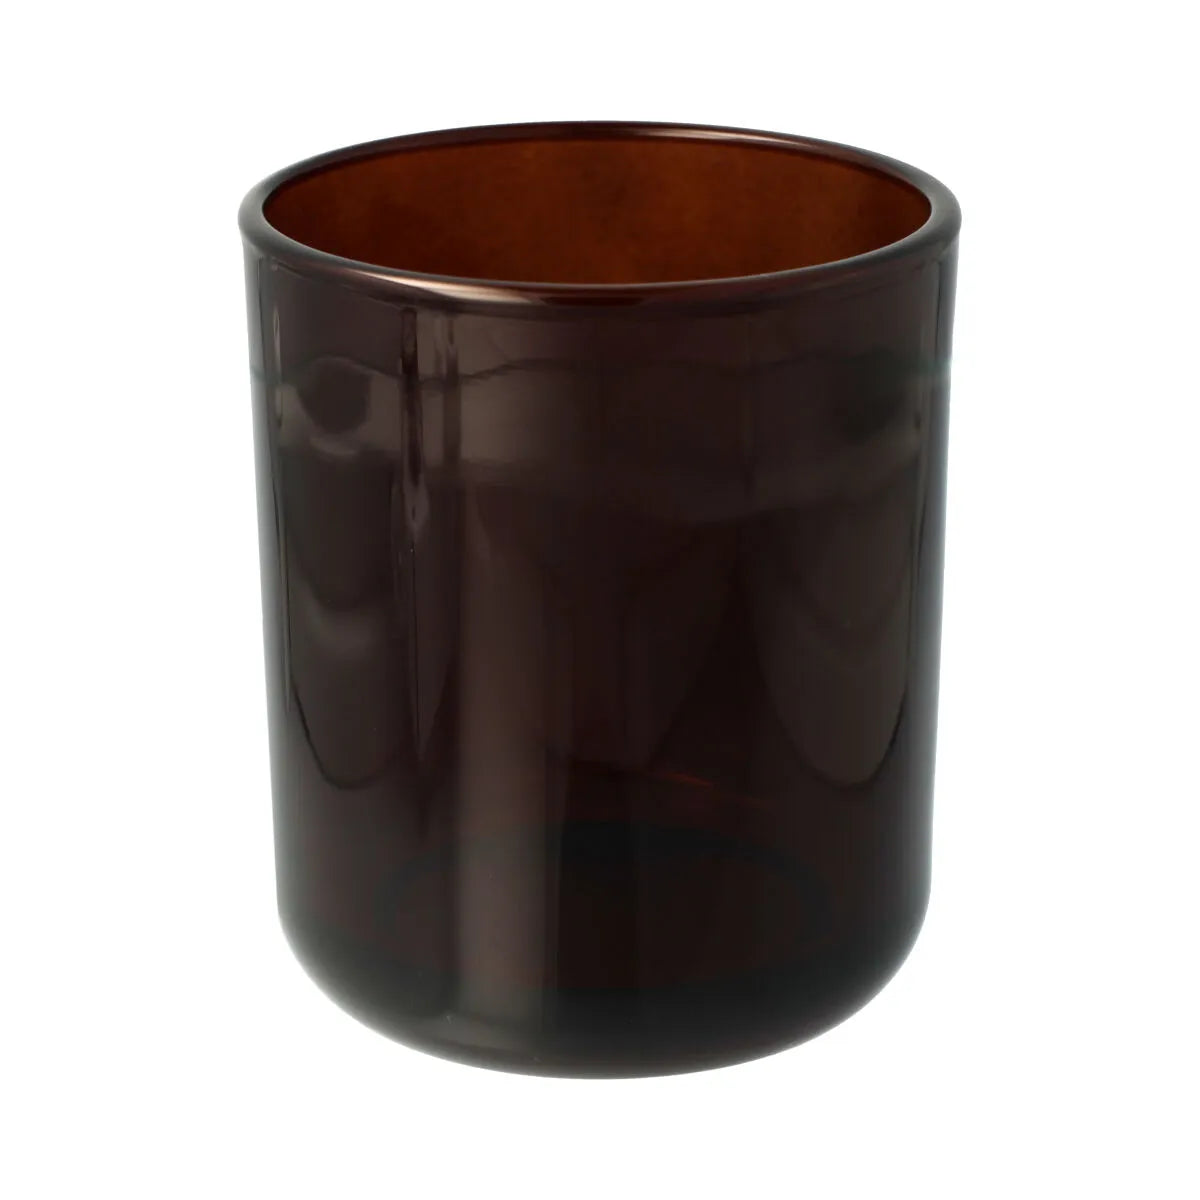 Salted Caramel Large Soy Candle